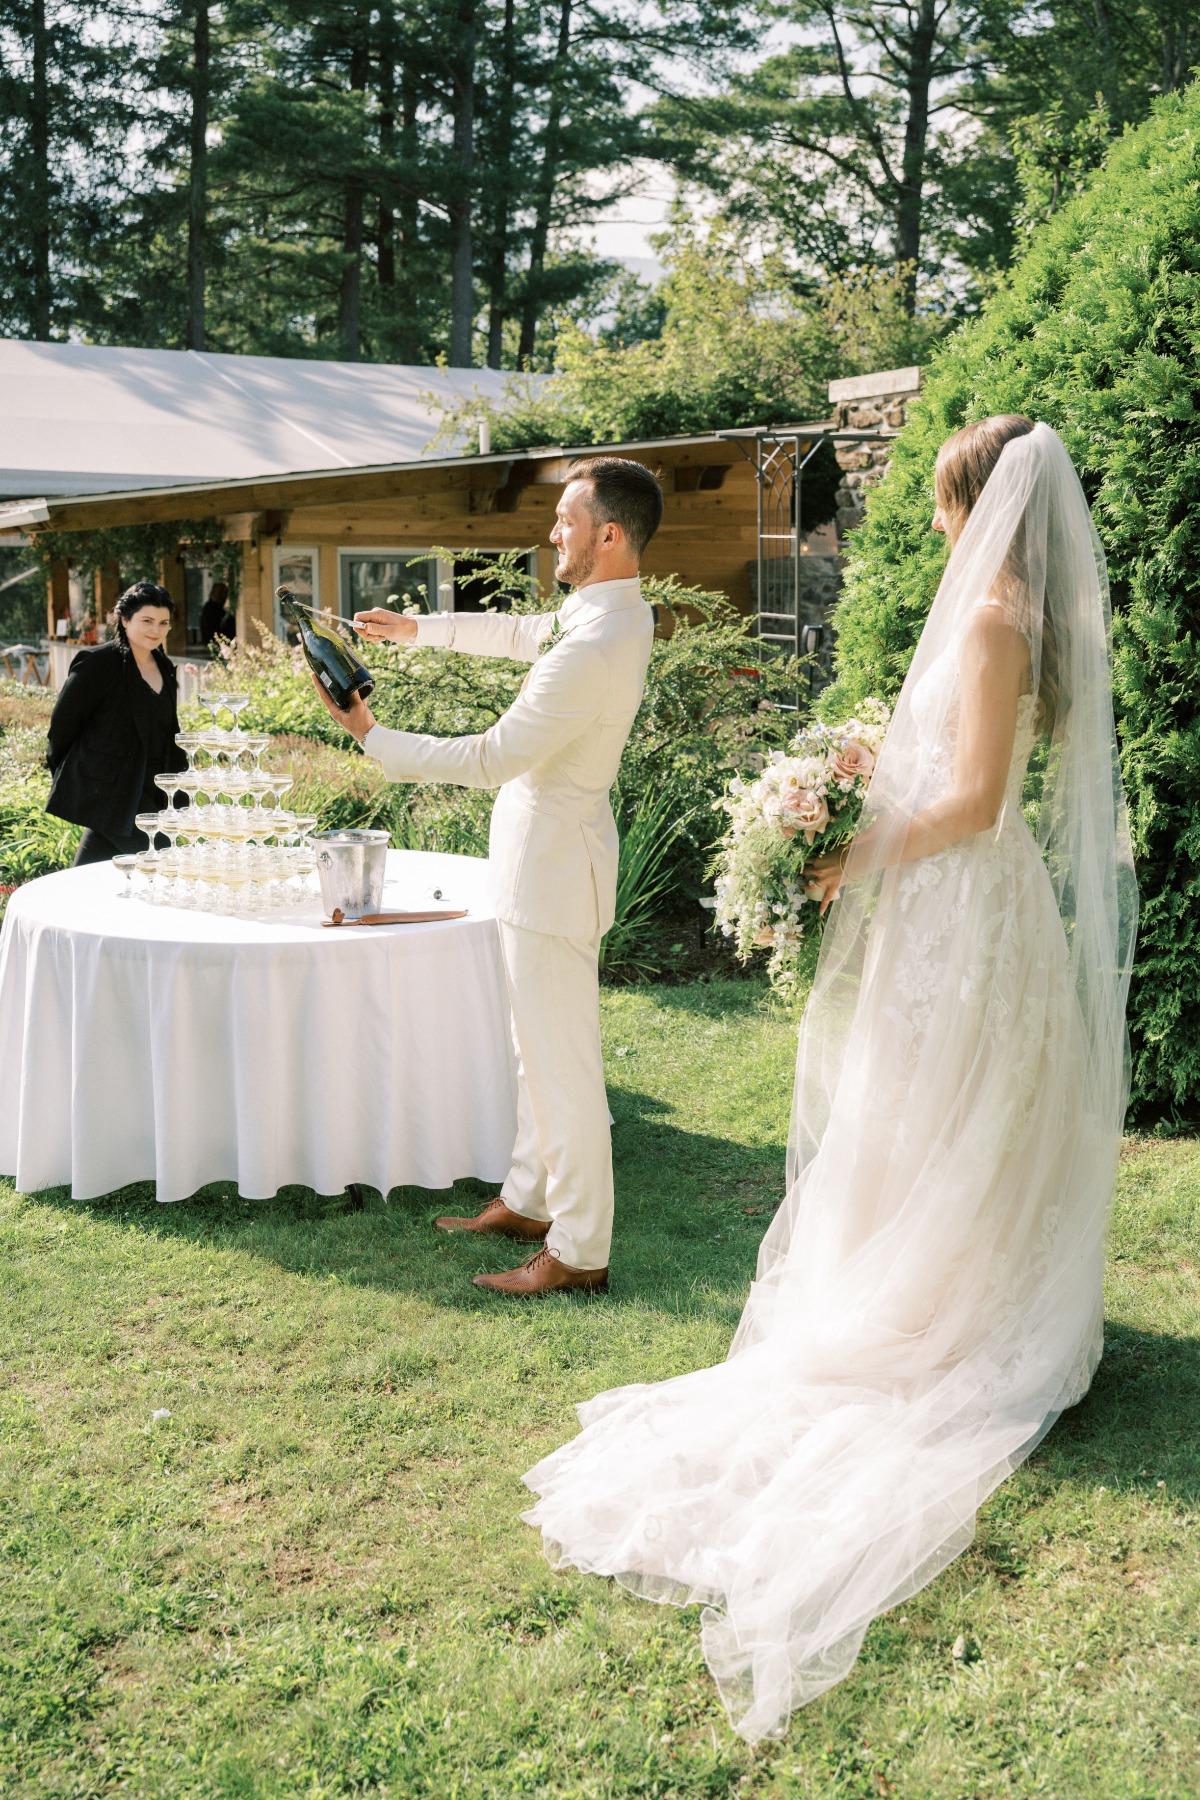 Post-ceremony outdoor wedding toast with champagne tower 